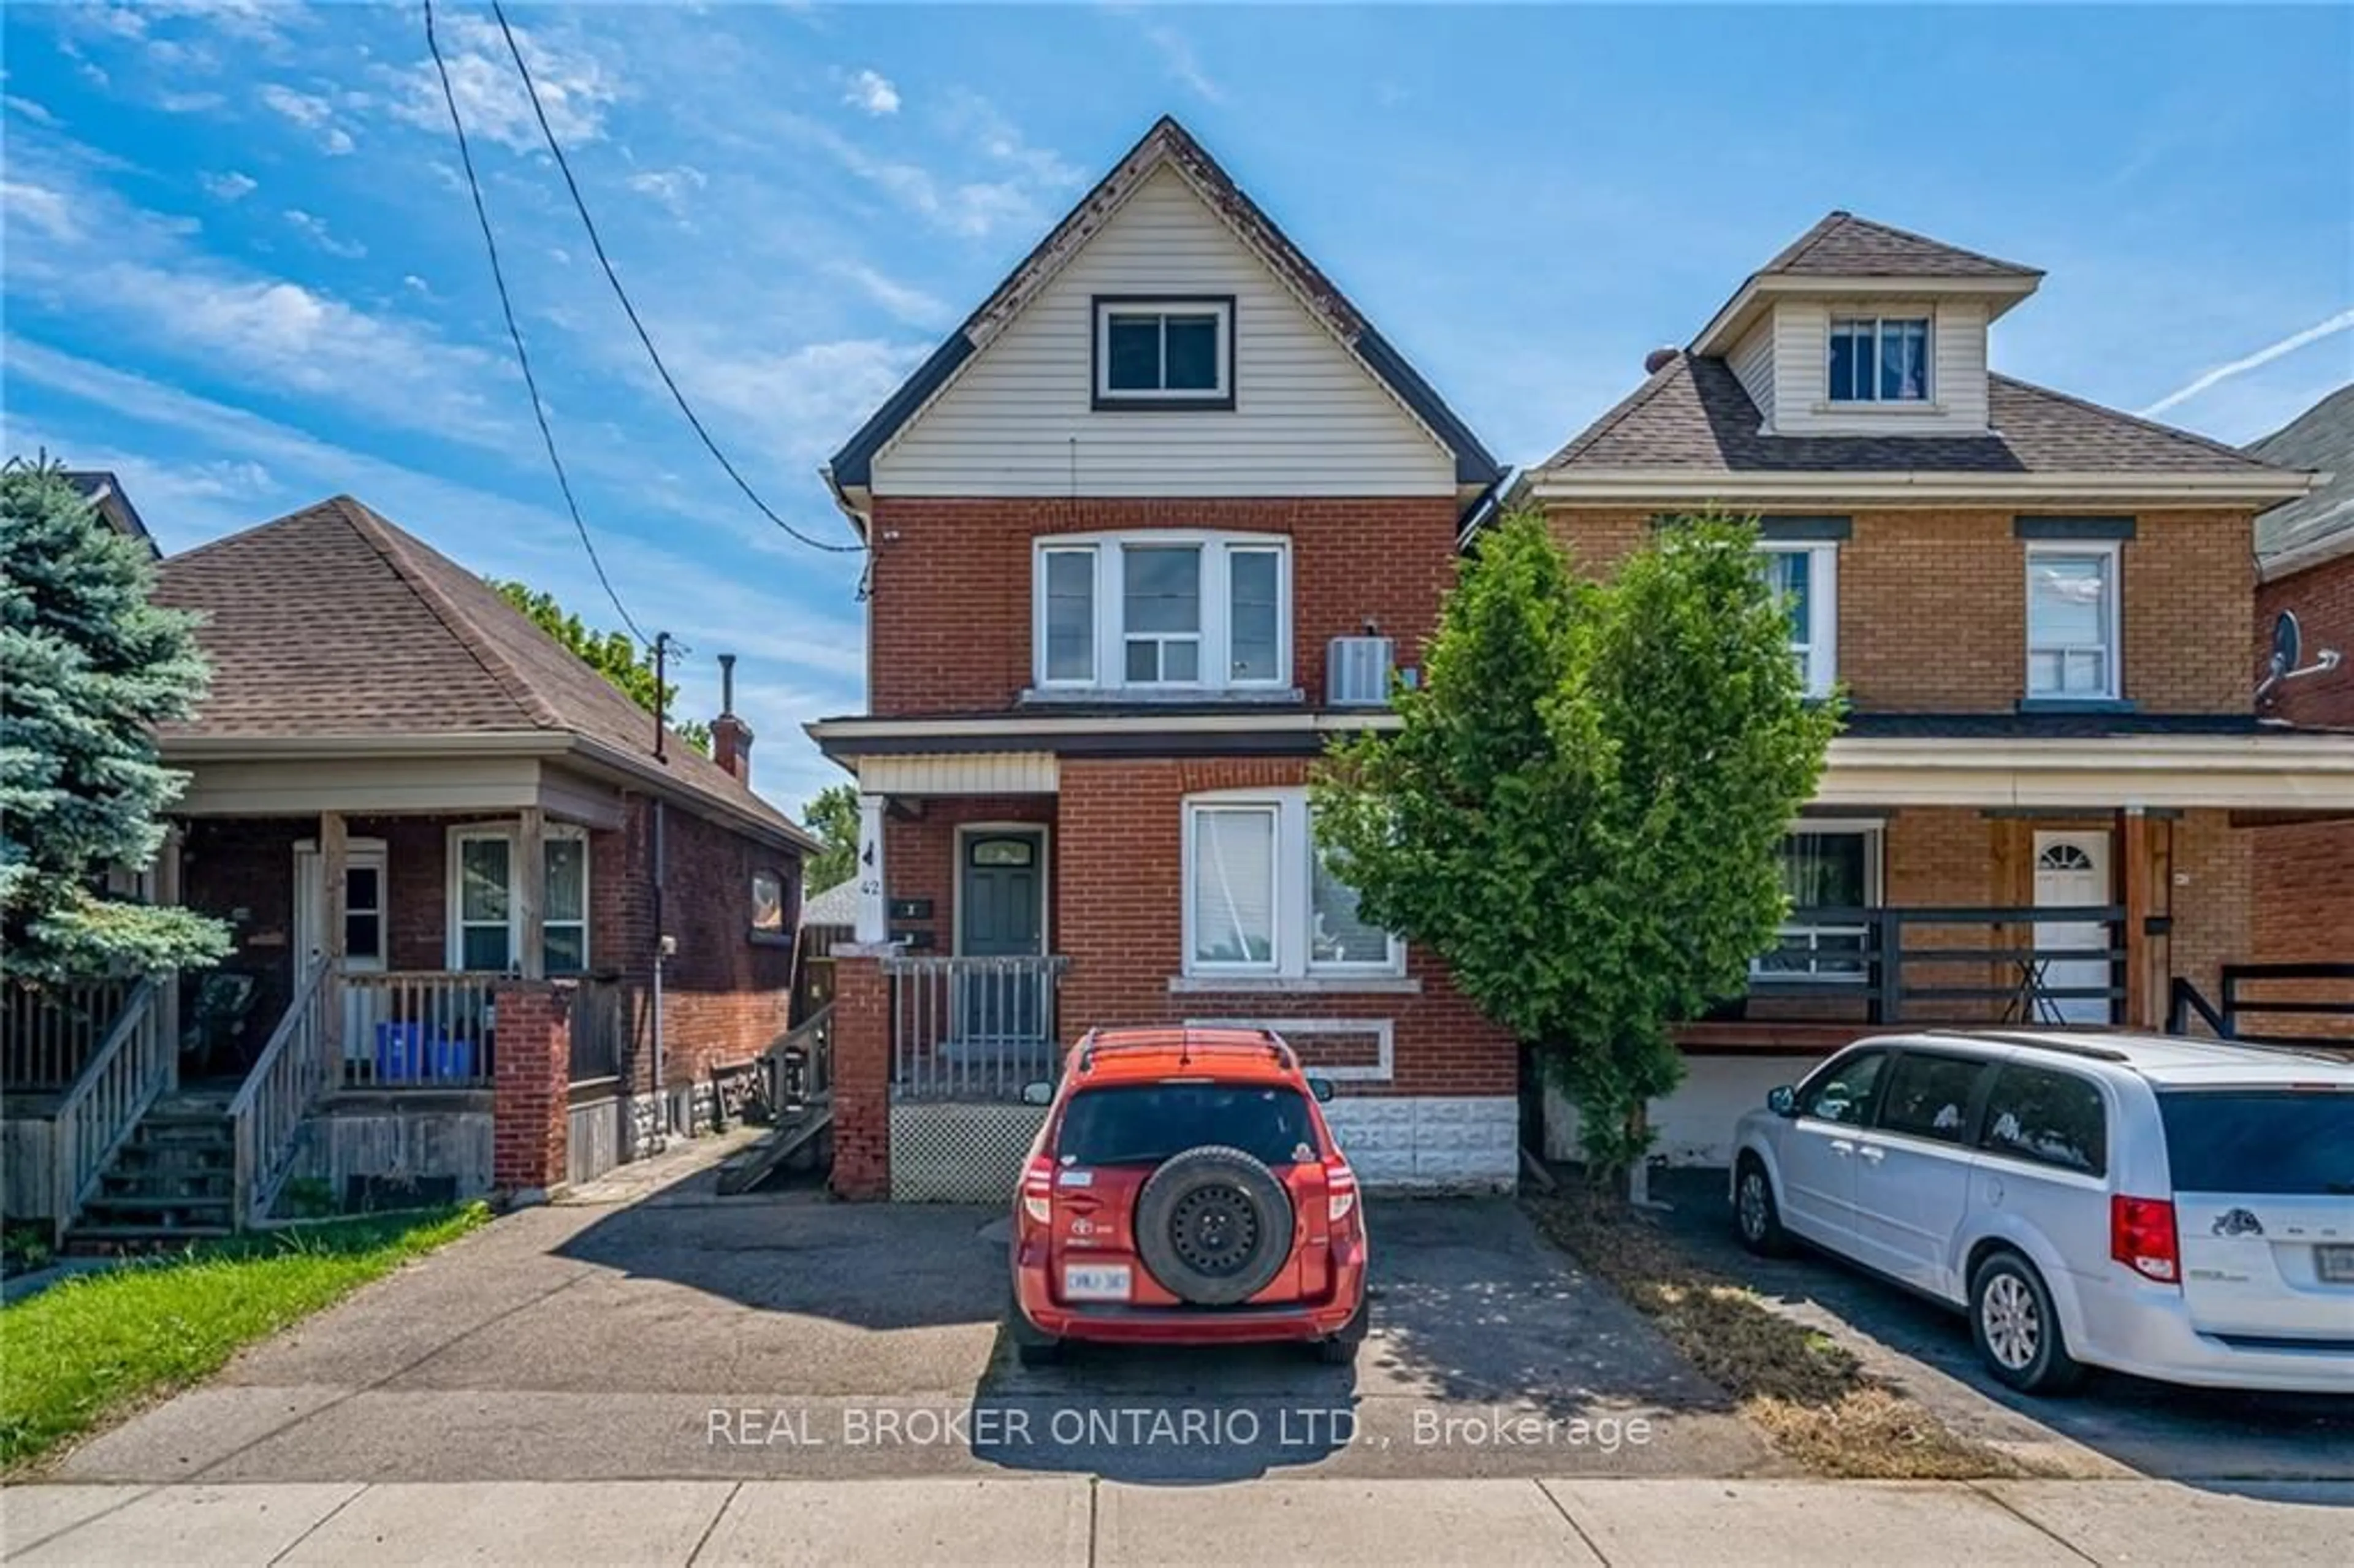 Frontside or backside of a home for 42 Balsam Ave, Hamilton Ontario L8L 6Y3